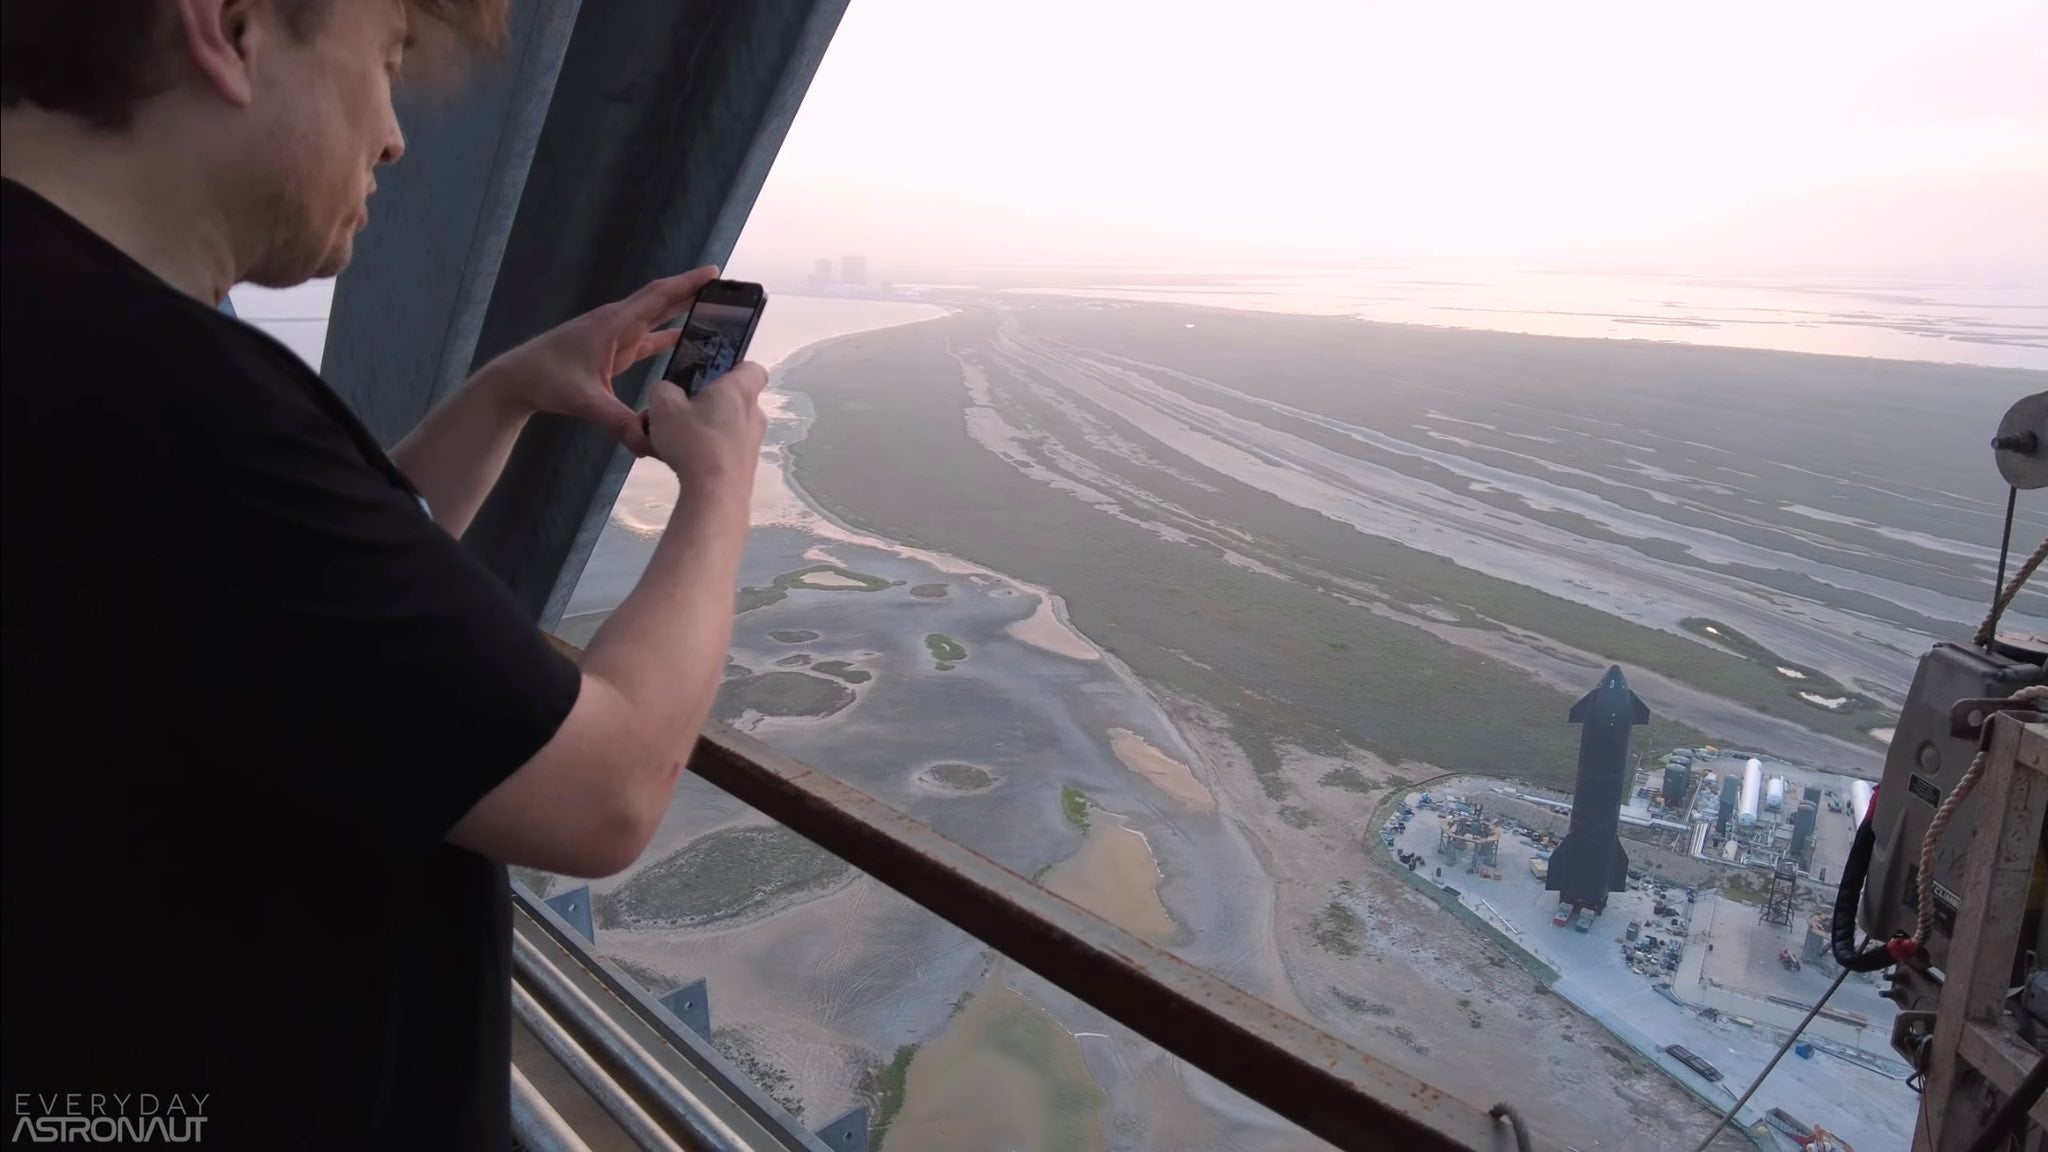 VIDEO: Elon Musk Gives Everyday Astronaut A Tour Of The SpaceX Starship Launch Tower